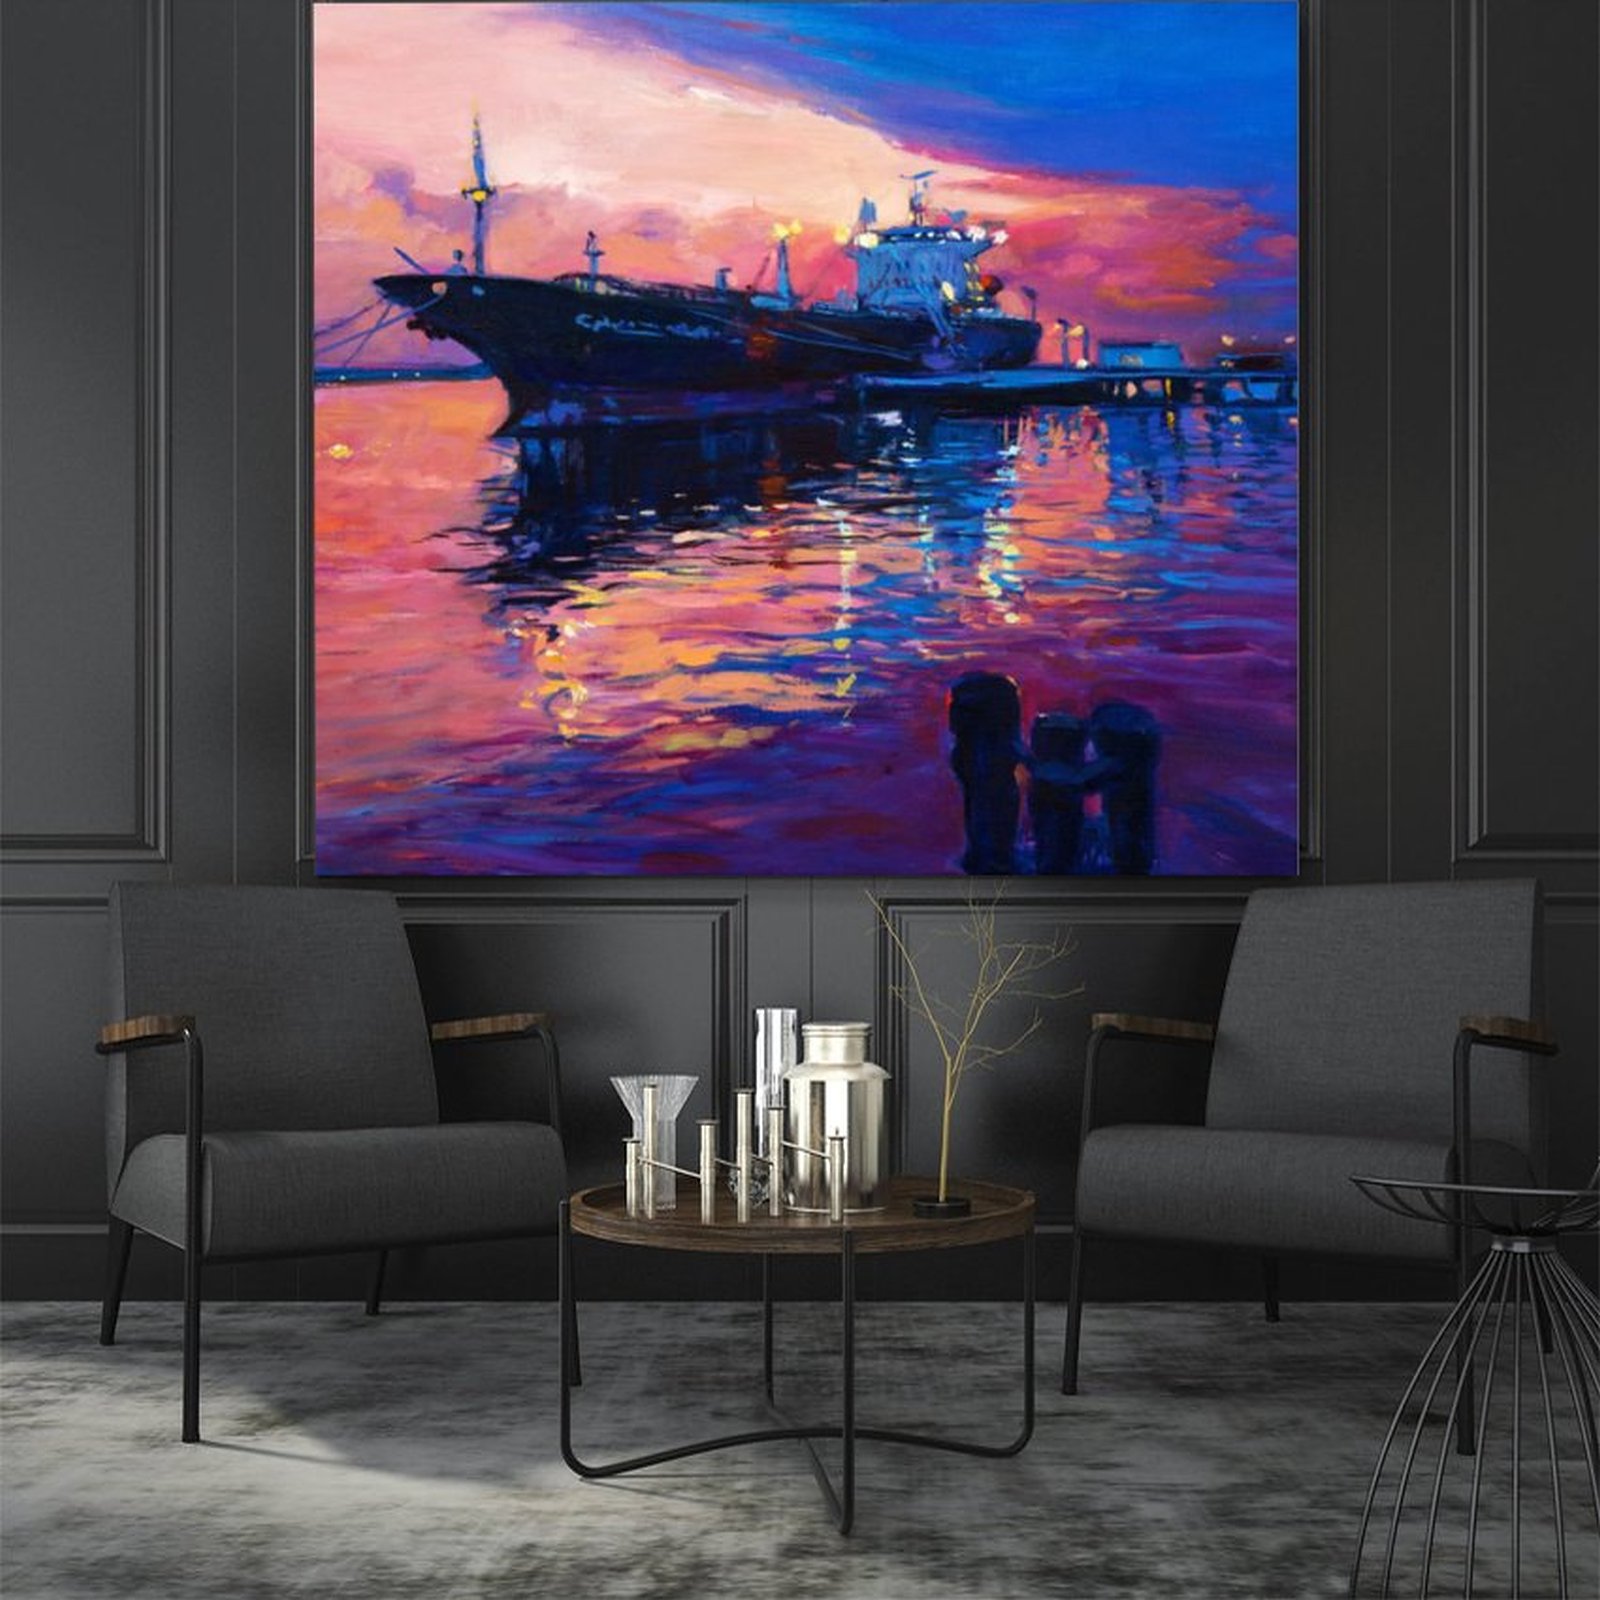 Abstract Night View Scene Canvas Painting Oil  Print Wall Art Picture Home Decor